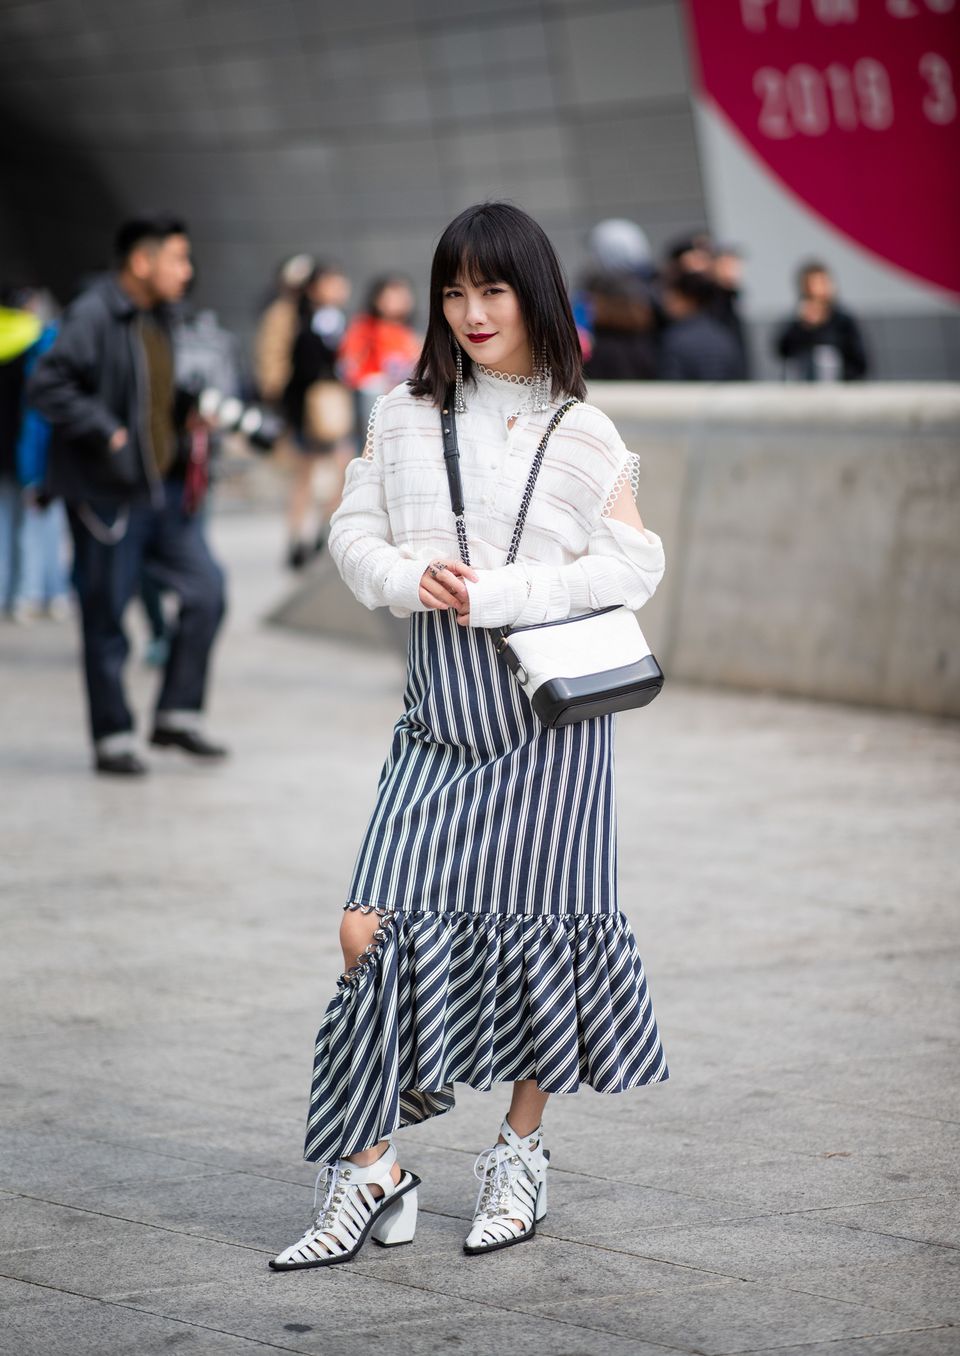 Seoul Street Style Photos Will Seriously Inspire You To Up Your Fashion Game Huffpost Life